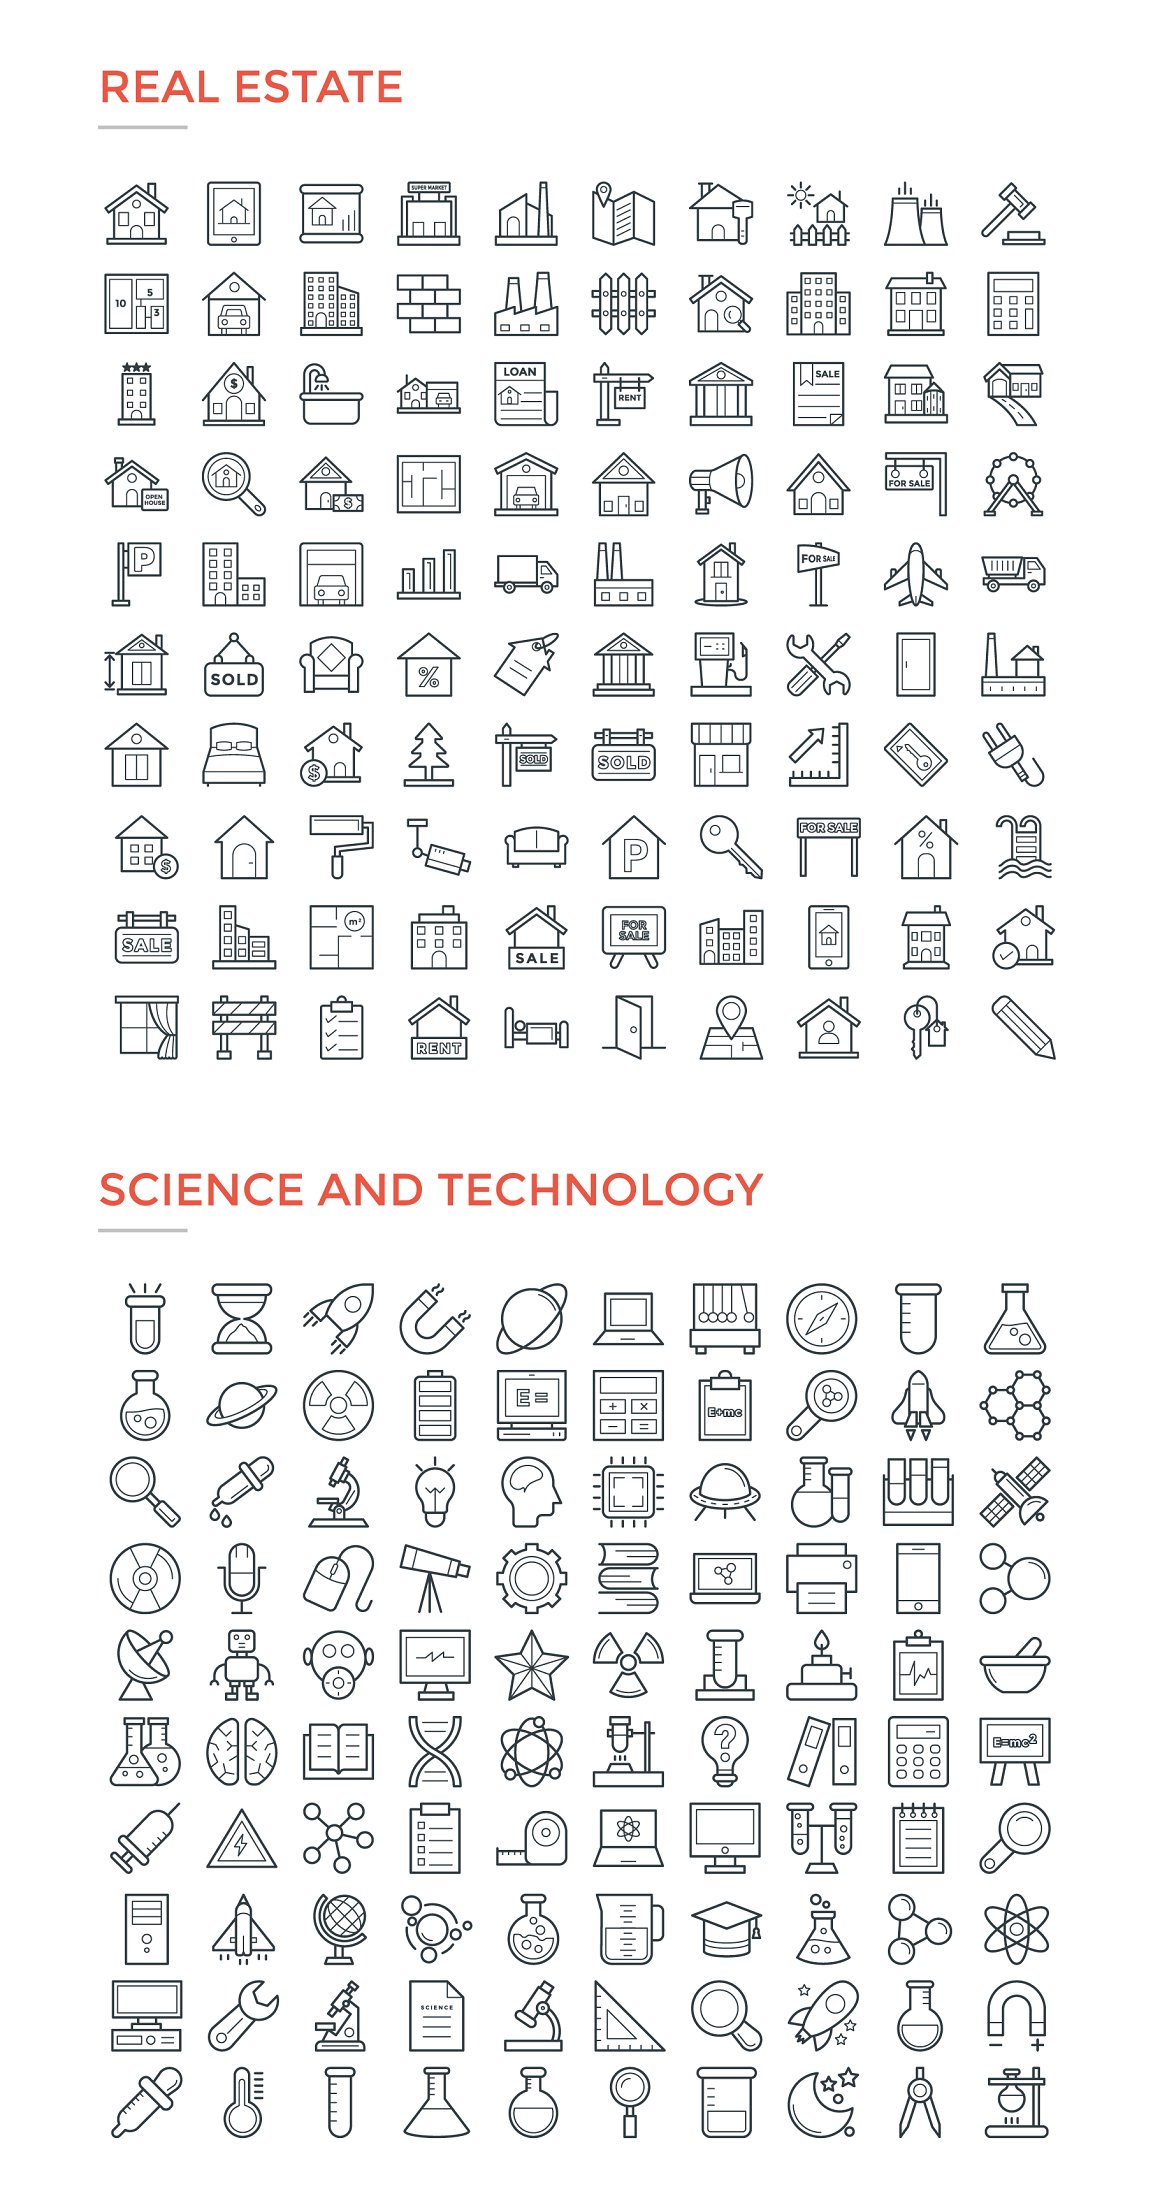 Real estate and science & technology black icons on a white background.